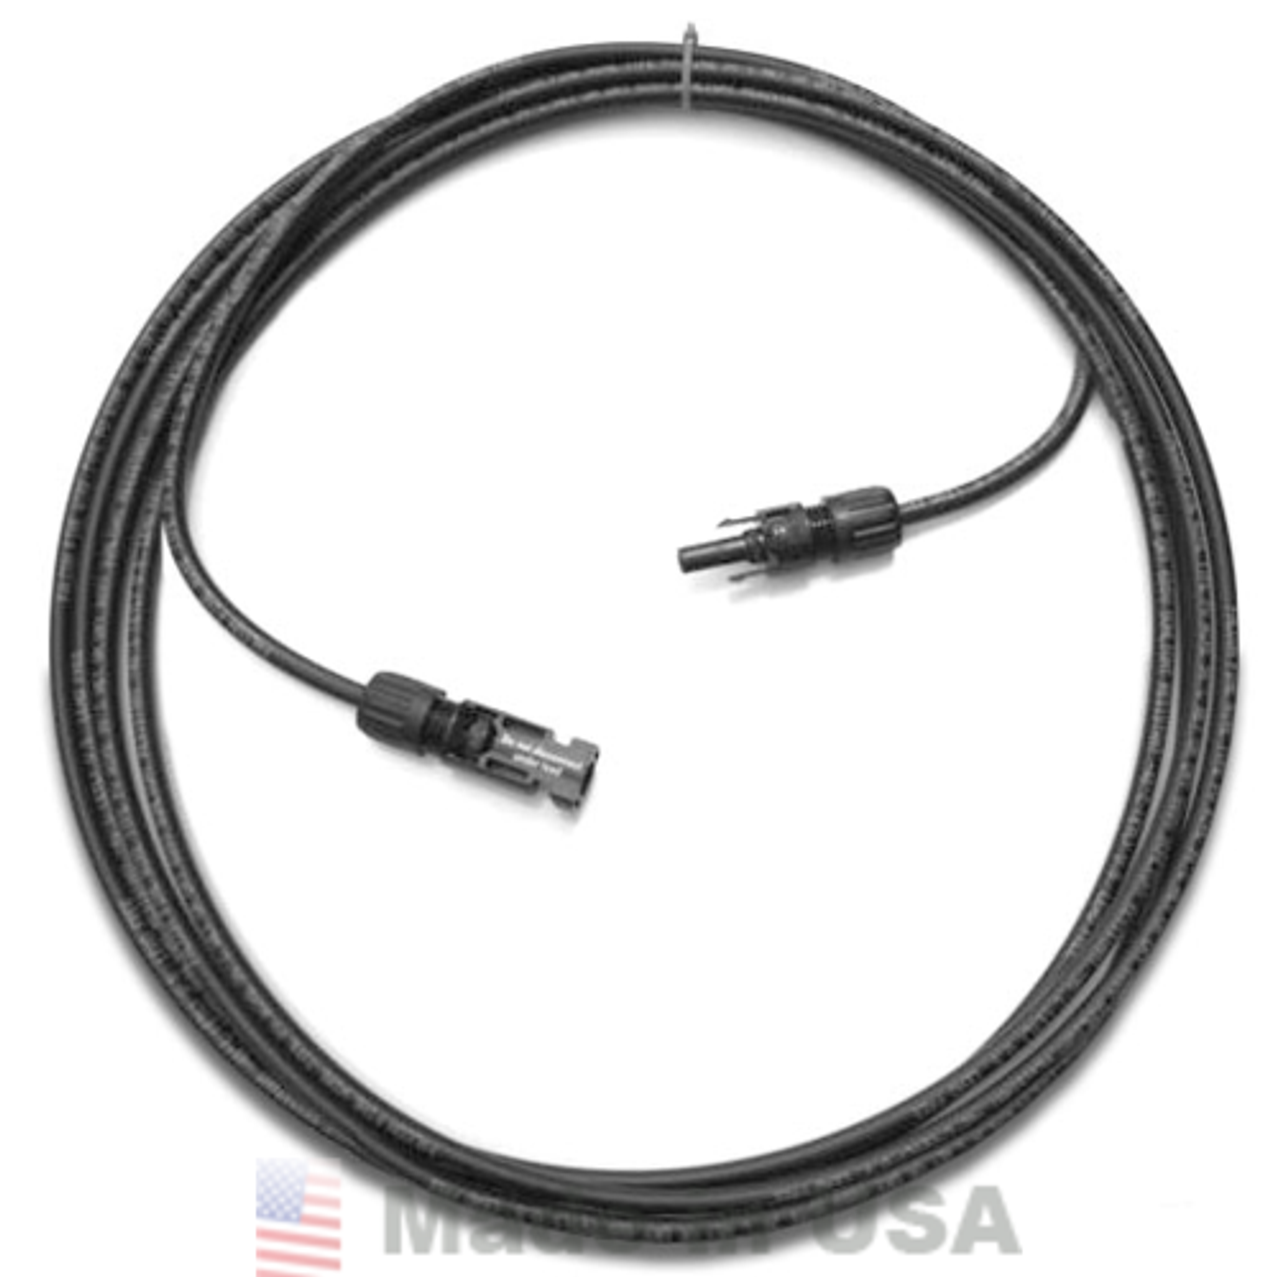 Multi-Contact 15' MC4 Connector Extension #10 AWG